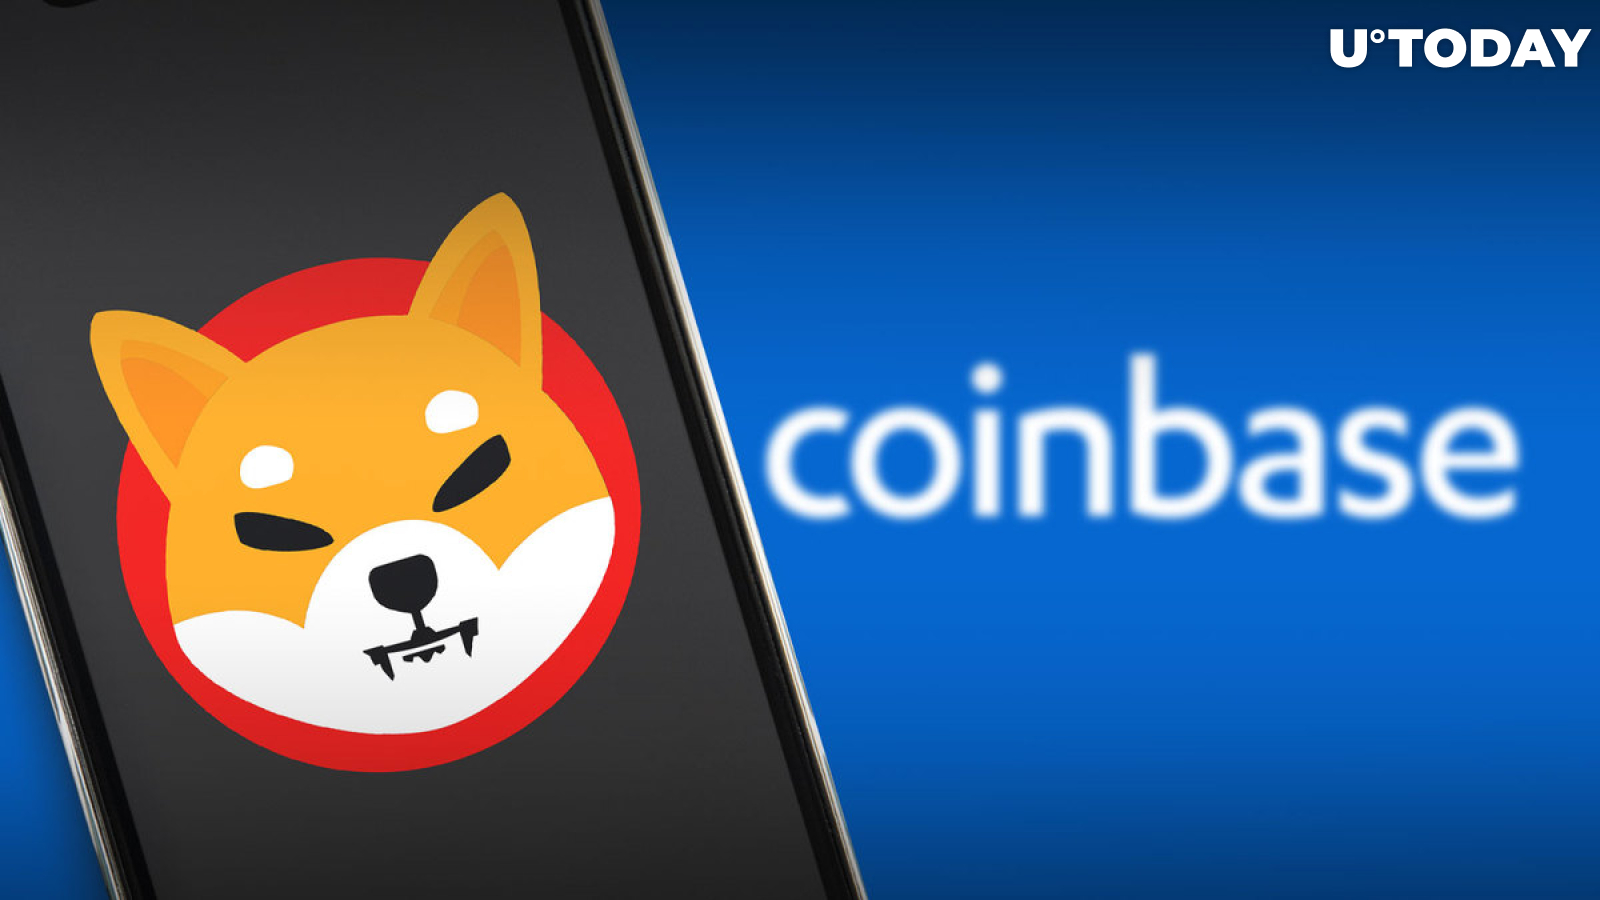 Over Trillion SHIB Moved to Coinbase, Here's What's Happening